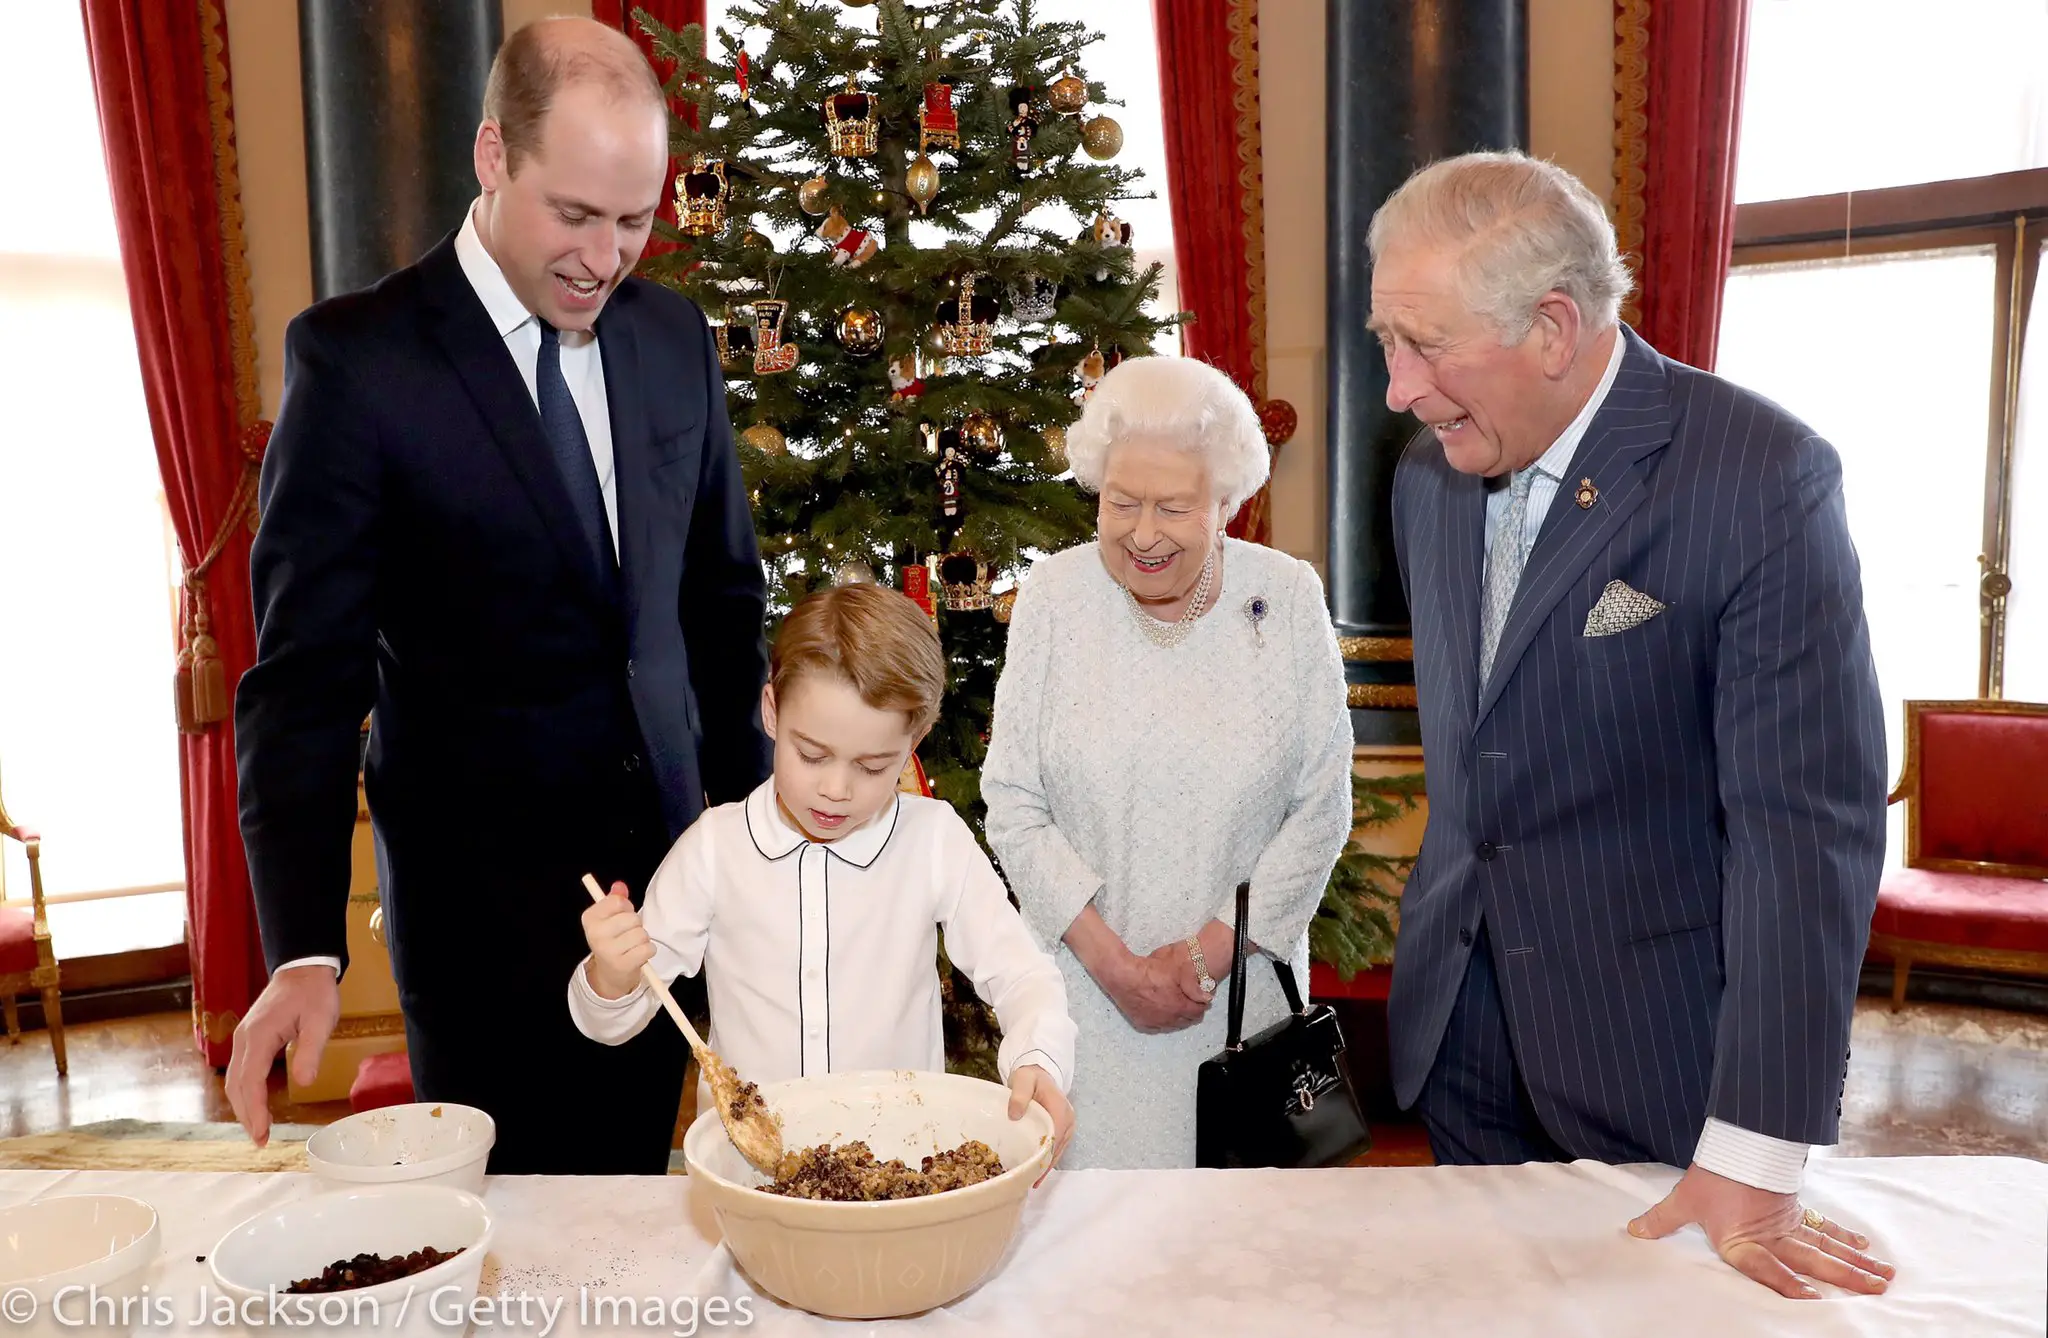 Prince George made puddings with Prince William Prince Charles and Queen Elizabeth